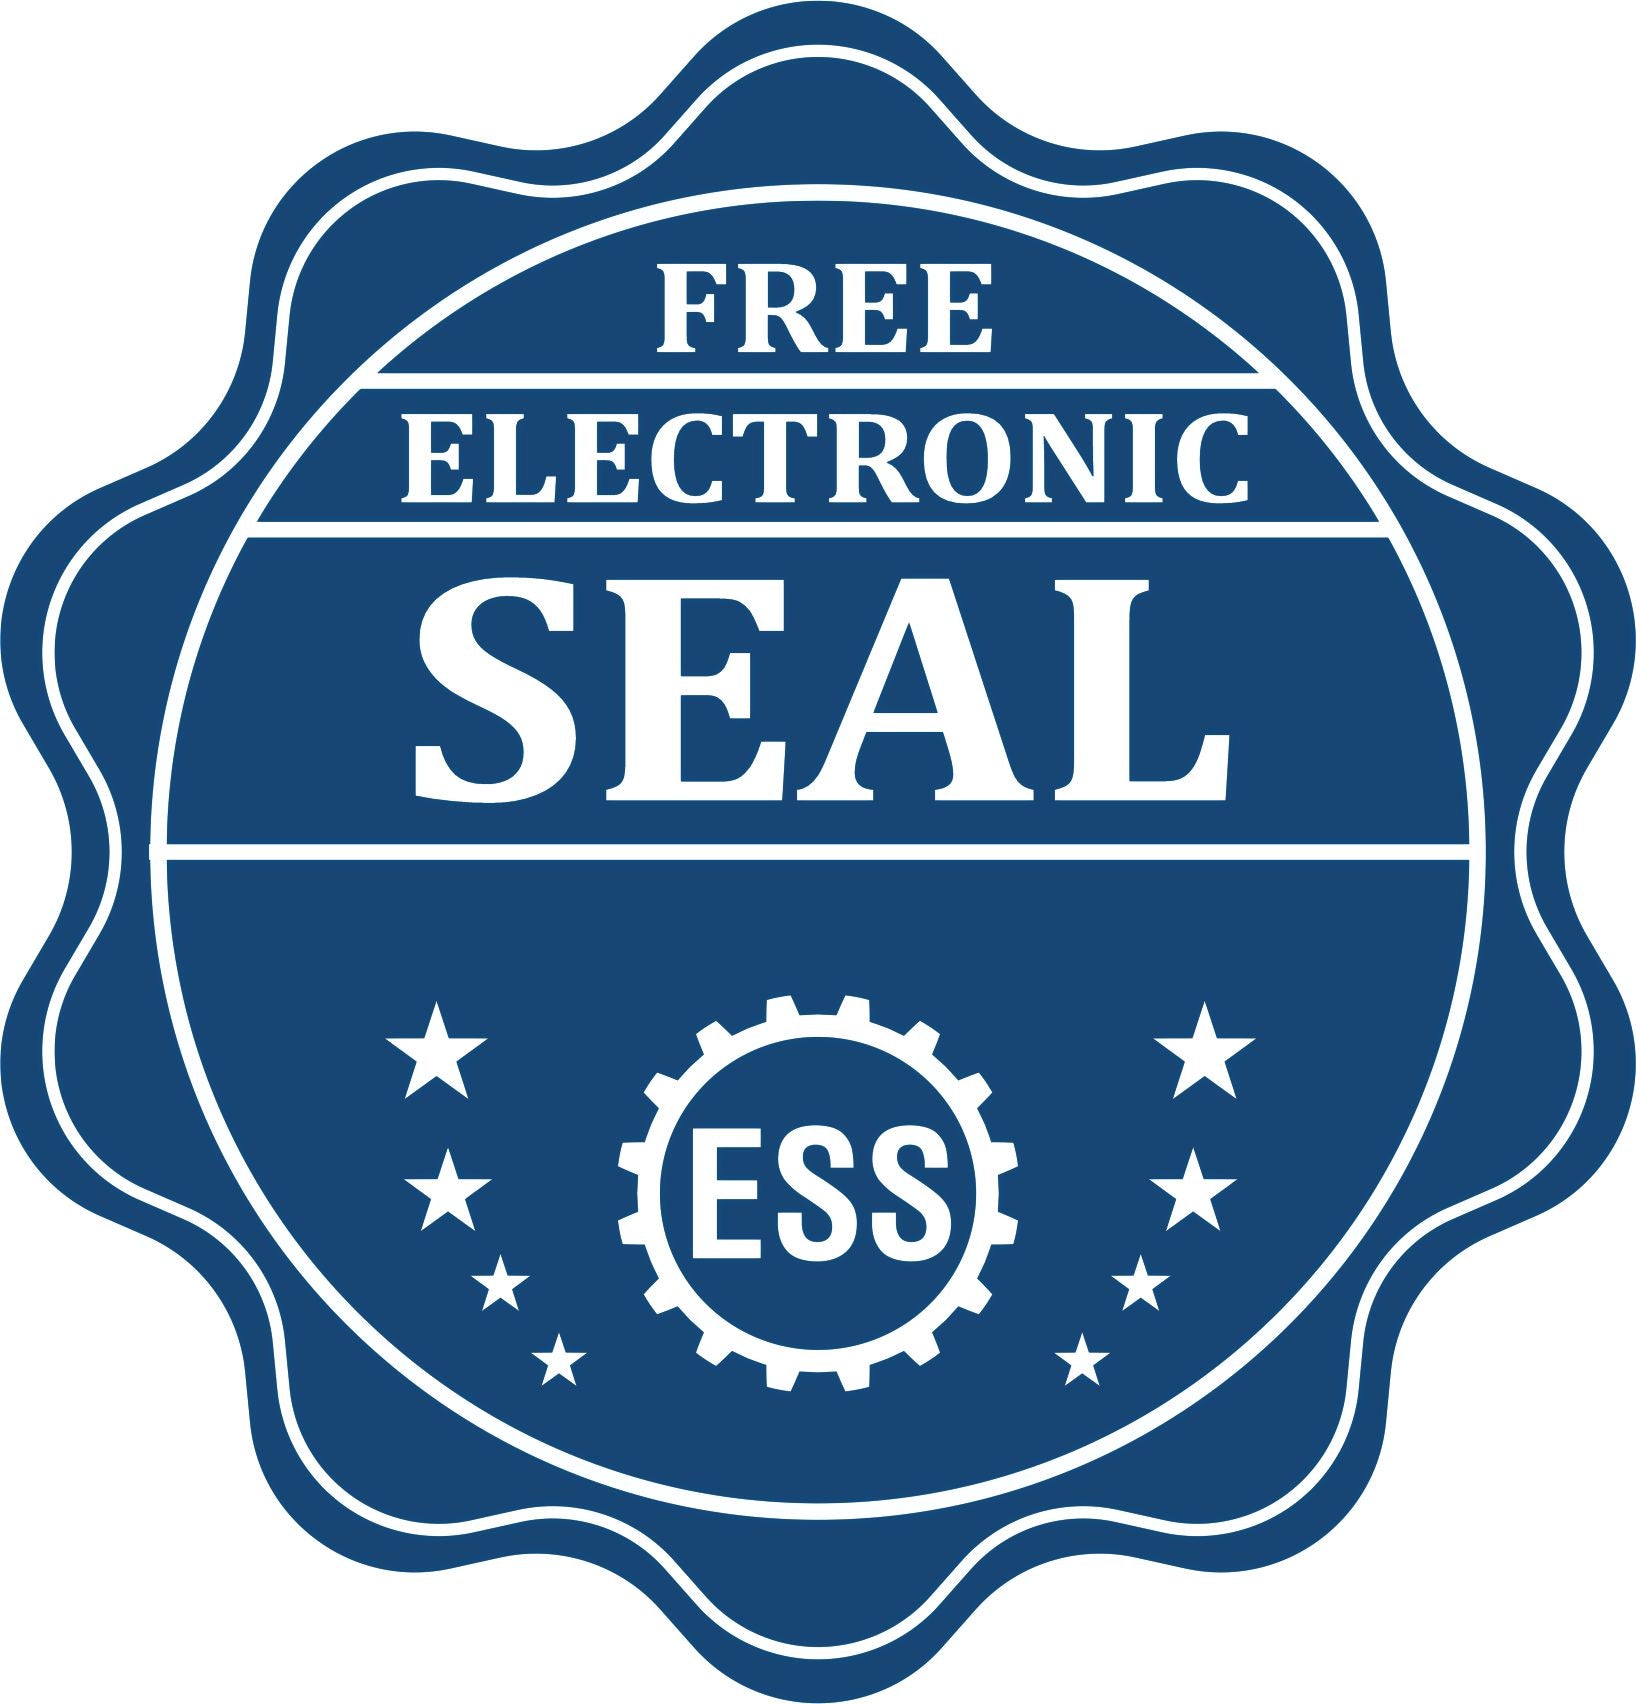 A badge showing a free electronic seal for the Hybrid North Dakota Landscape Architect Seal with stars and the ESS gear on the emblem.